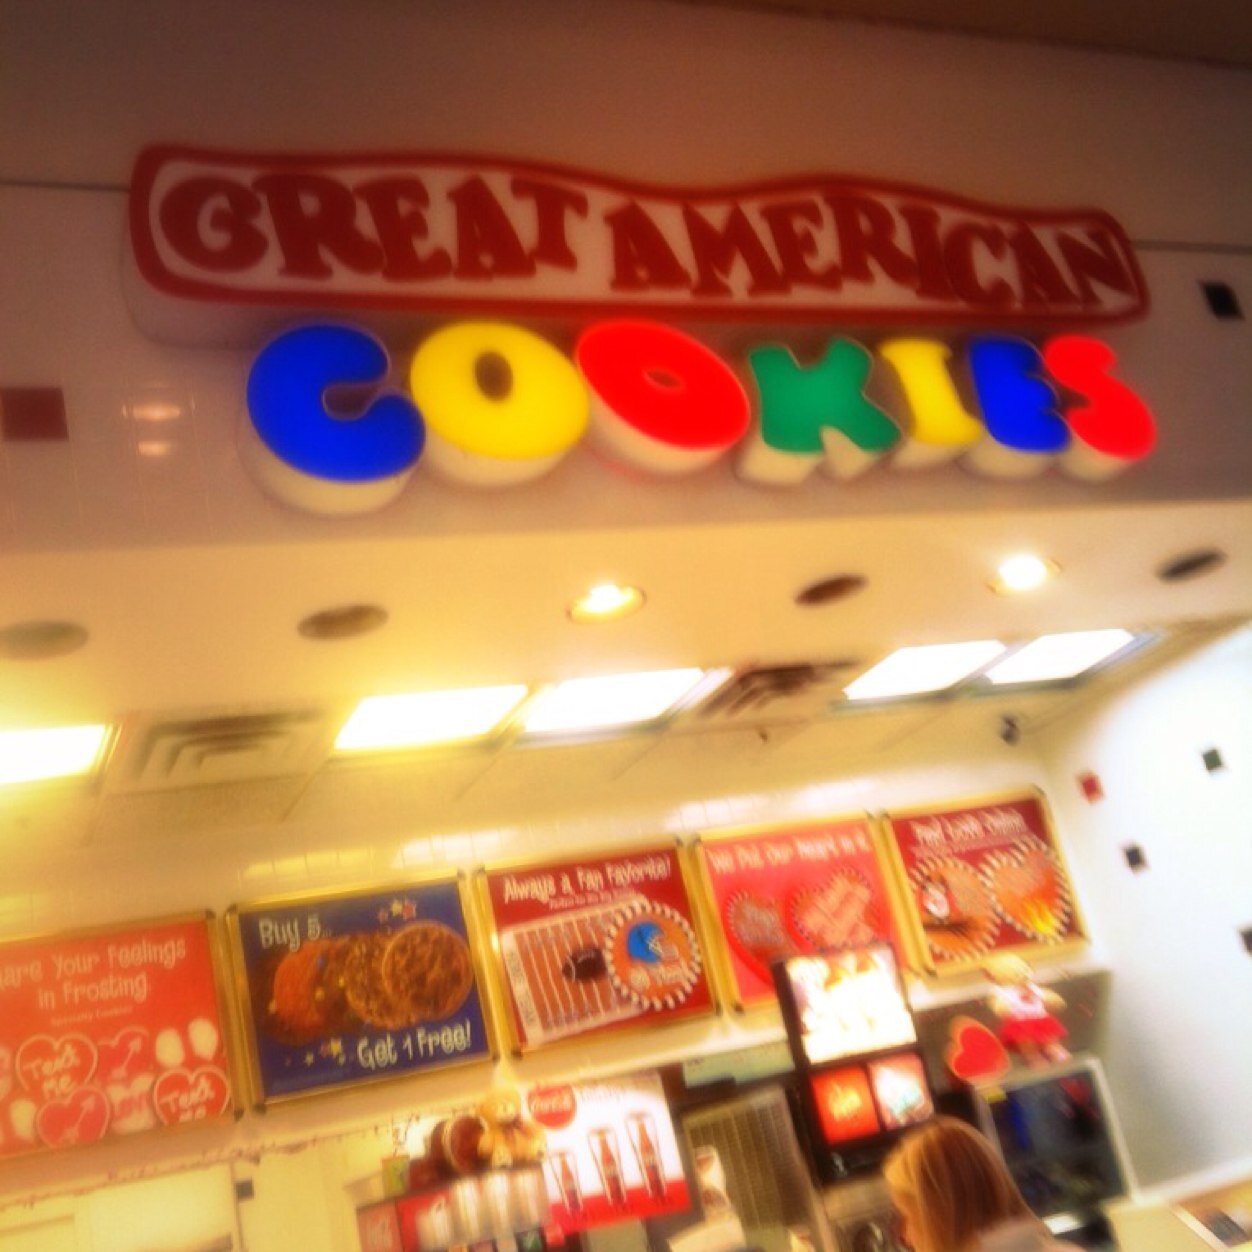 Great American Cookies at Castleton Square Mall!  http://t.co/6SeylUuh6u